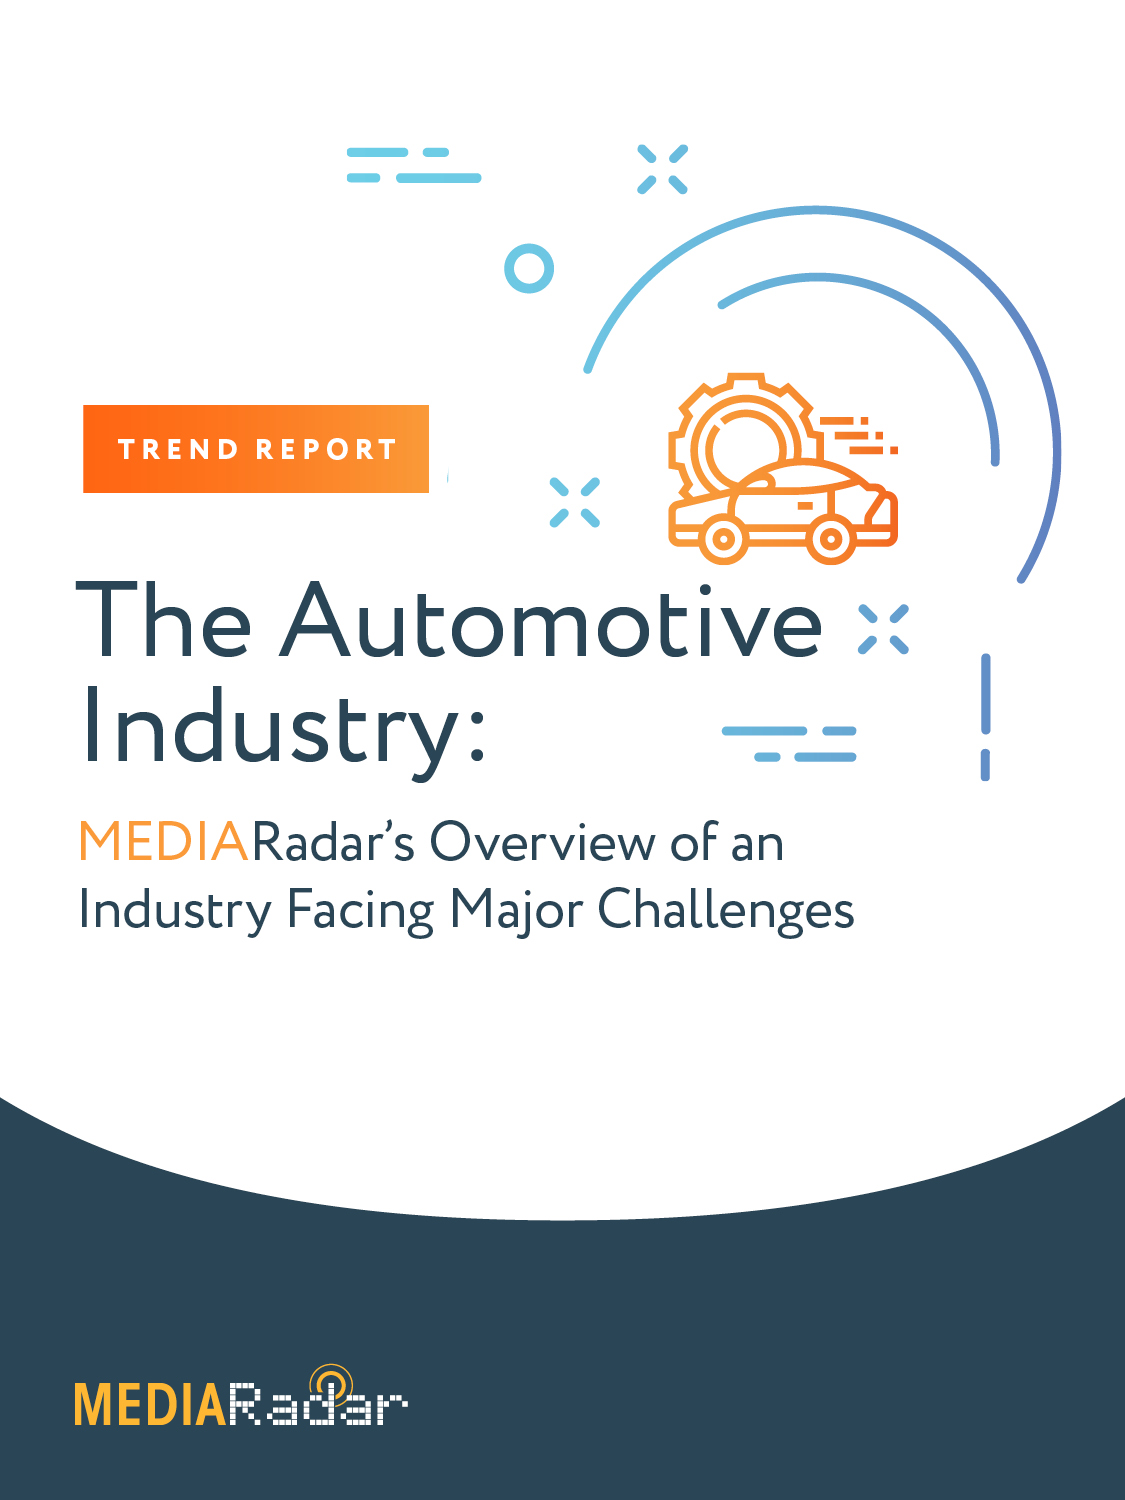 The Automotive Industry: MediaRadar’s Overview of an Industry Facing Major Challenges